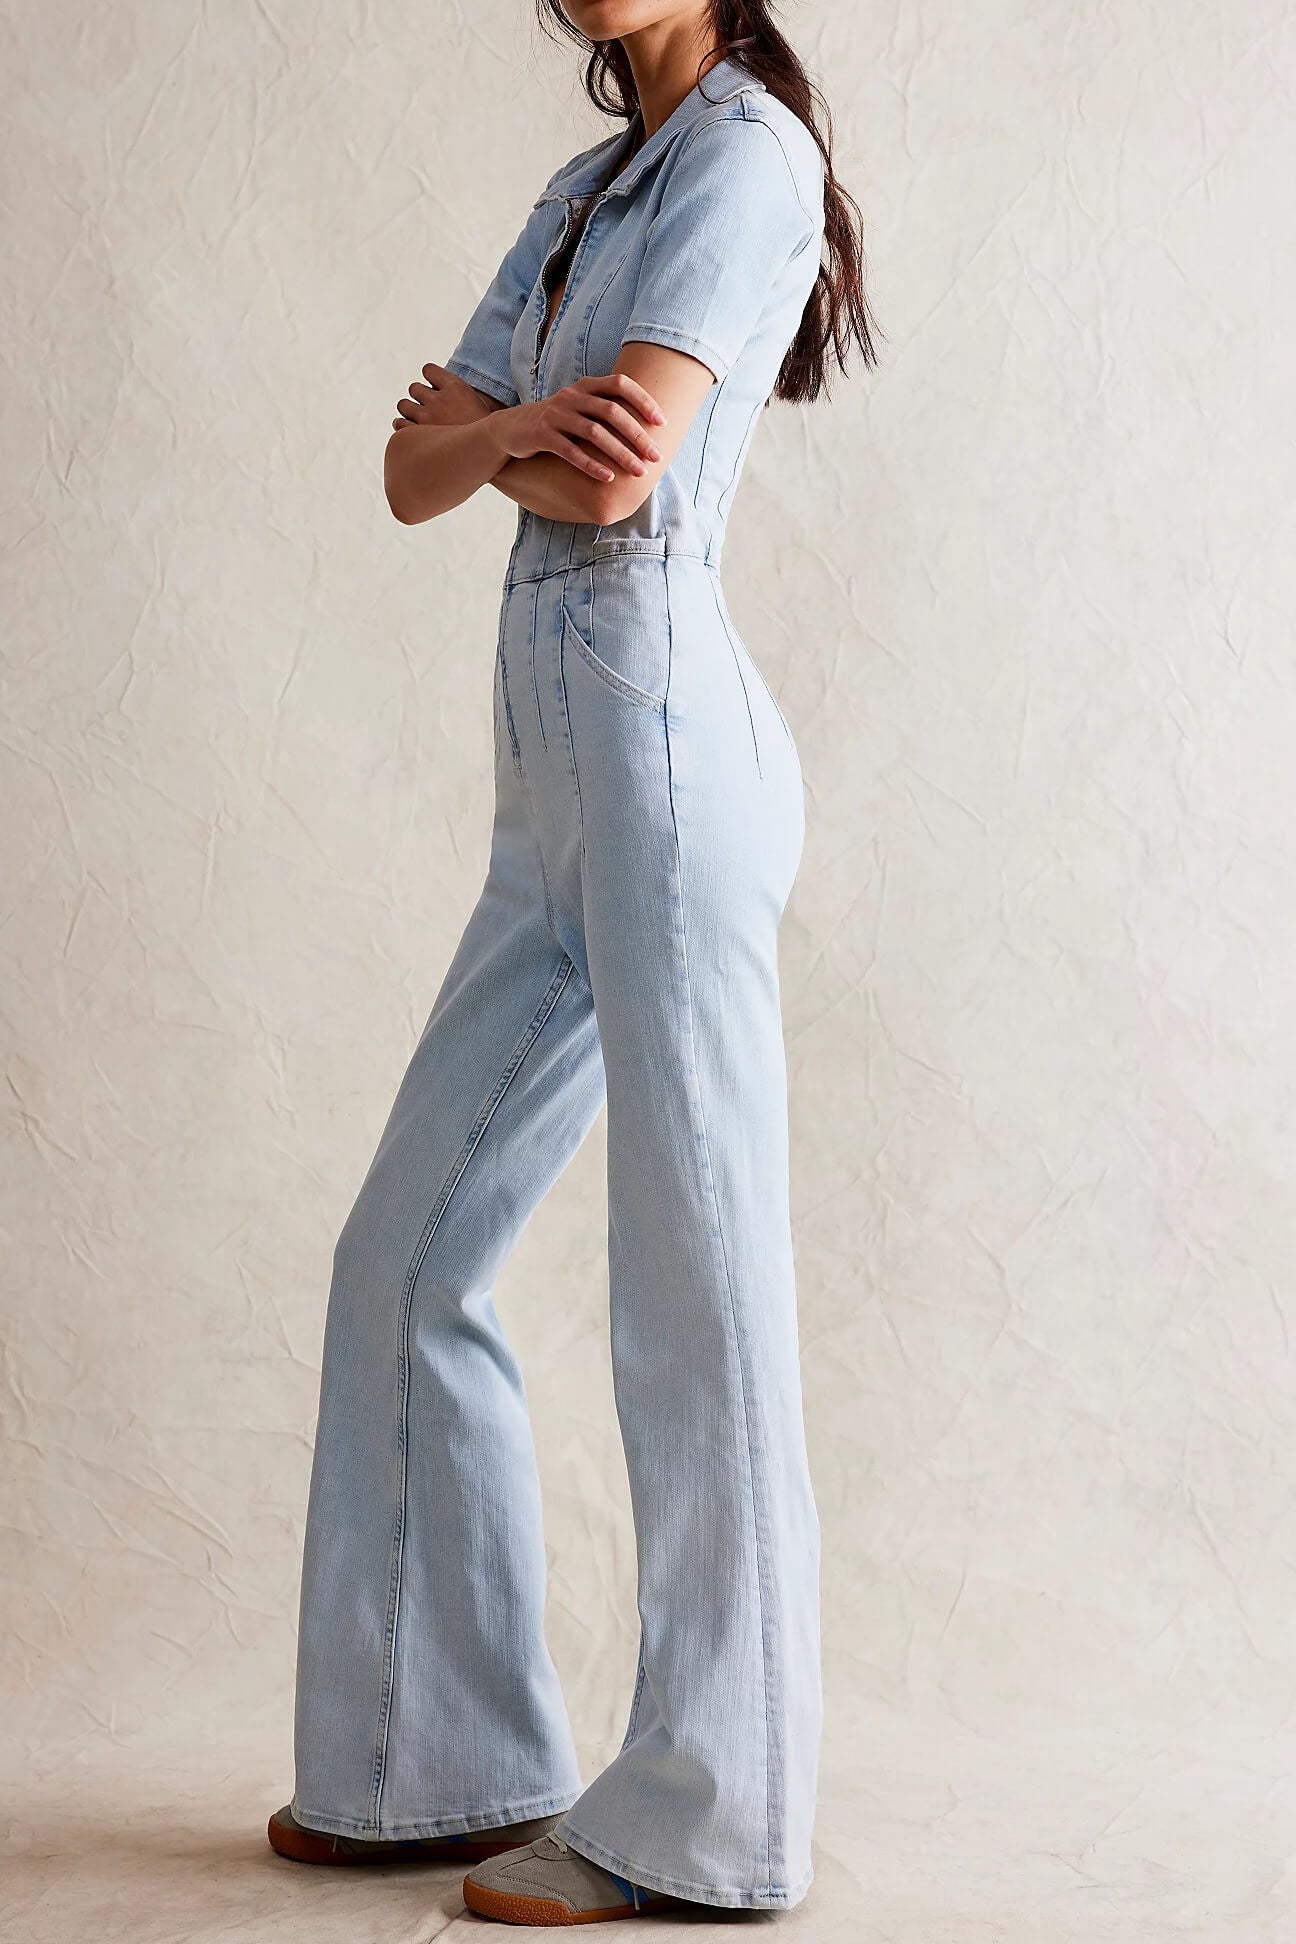 Free People Jayde flare jumpsuit in whimsy